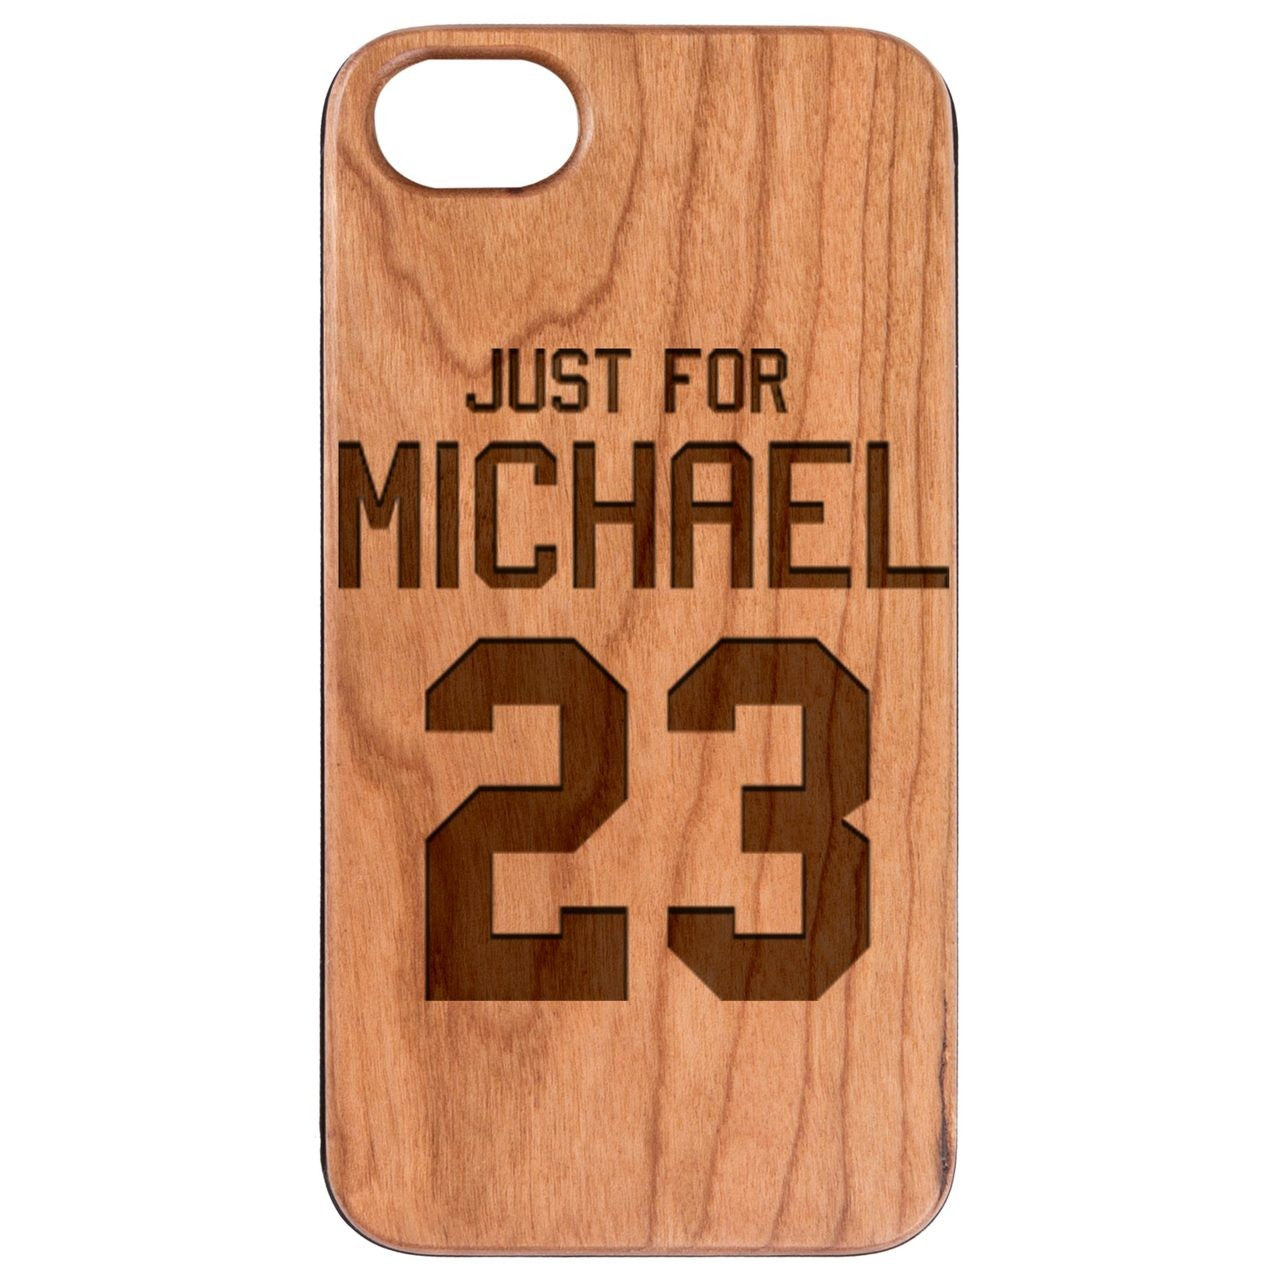  Just for Michael - Engraved - Wooden Phone Case - IPhone 13 Models